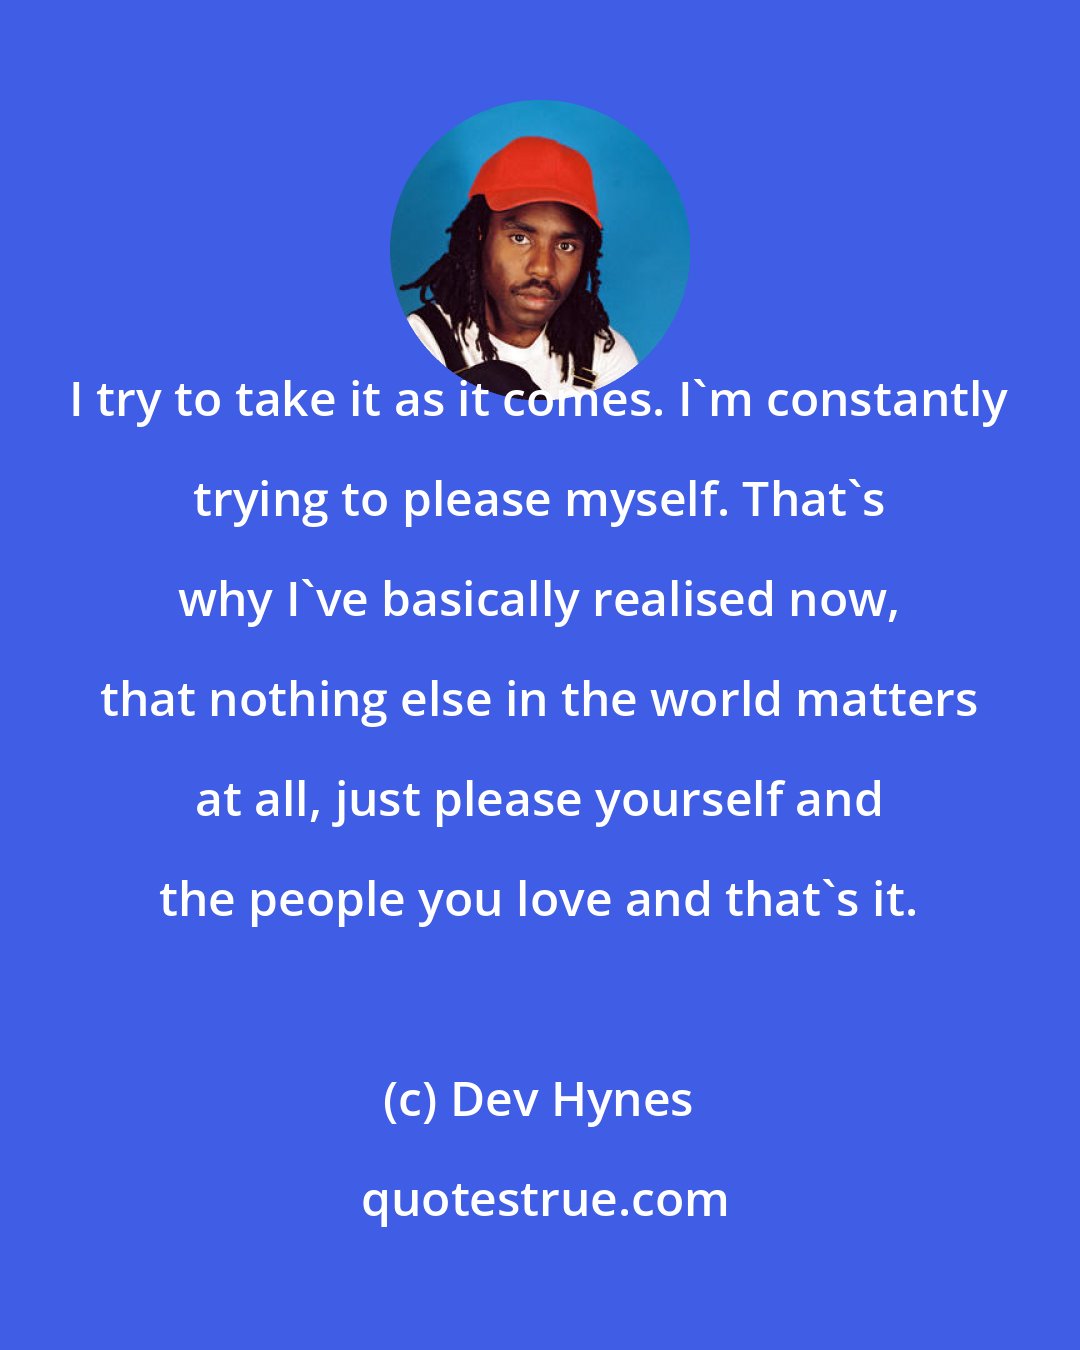 Dev Hynes: I try to take it as it comes. I'm constantly trying to please myself. That's why I've basically realised now, that nothing else in the world matters at all, just please yourself and the people you love and that's it.